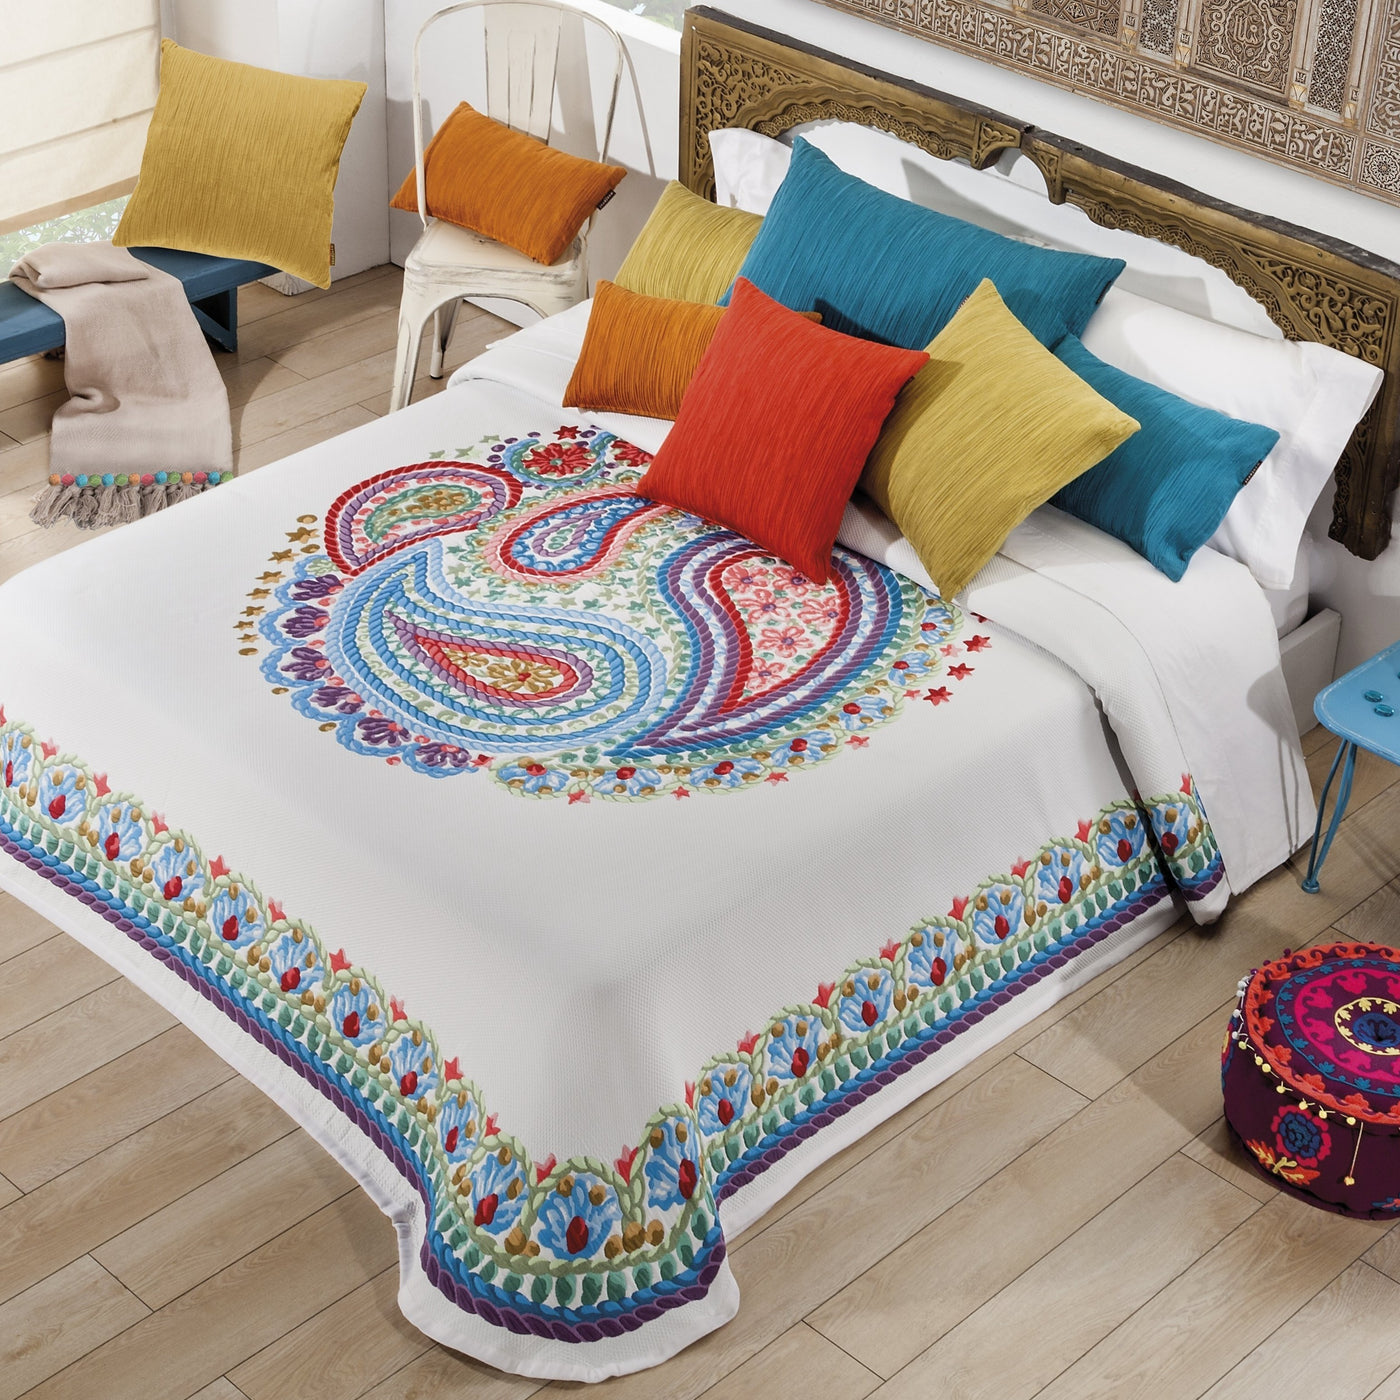 All Day Spanish Bed Cover